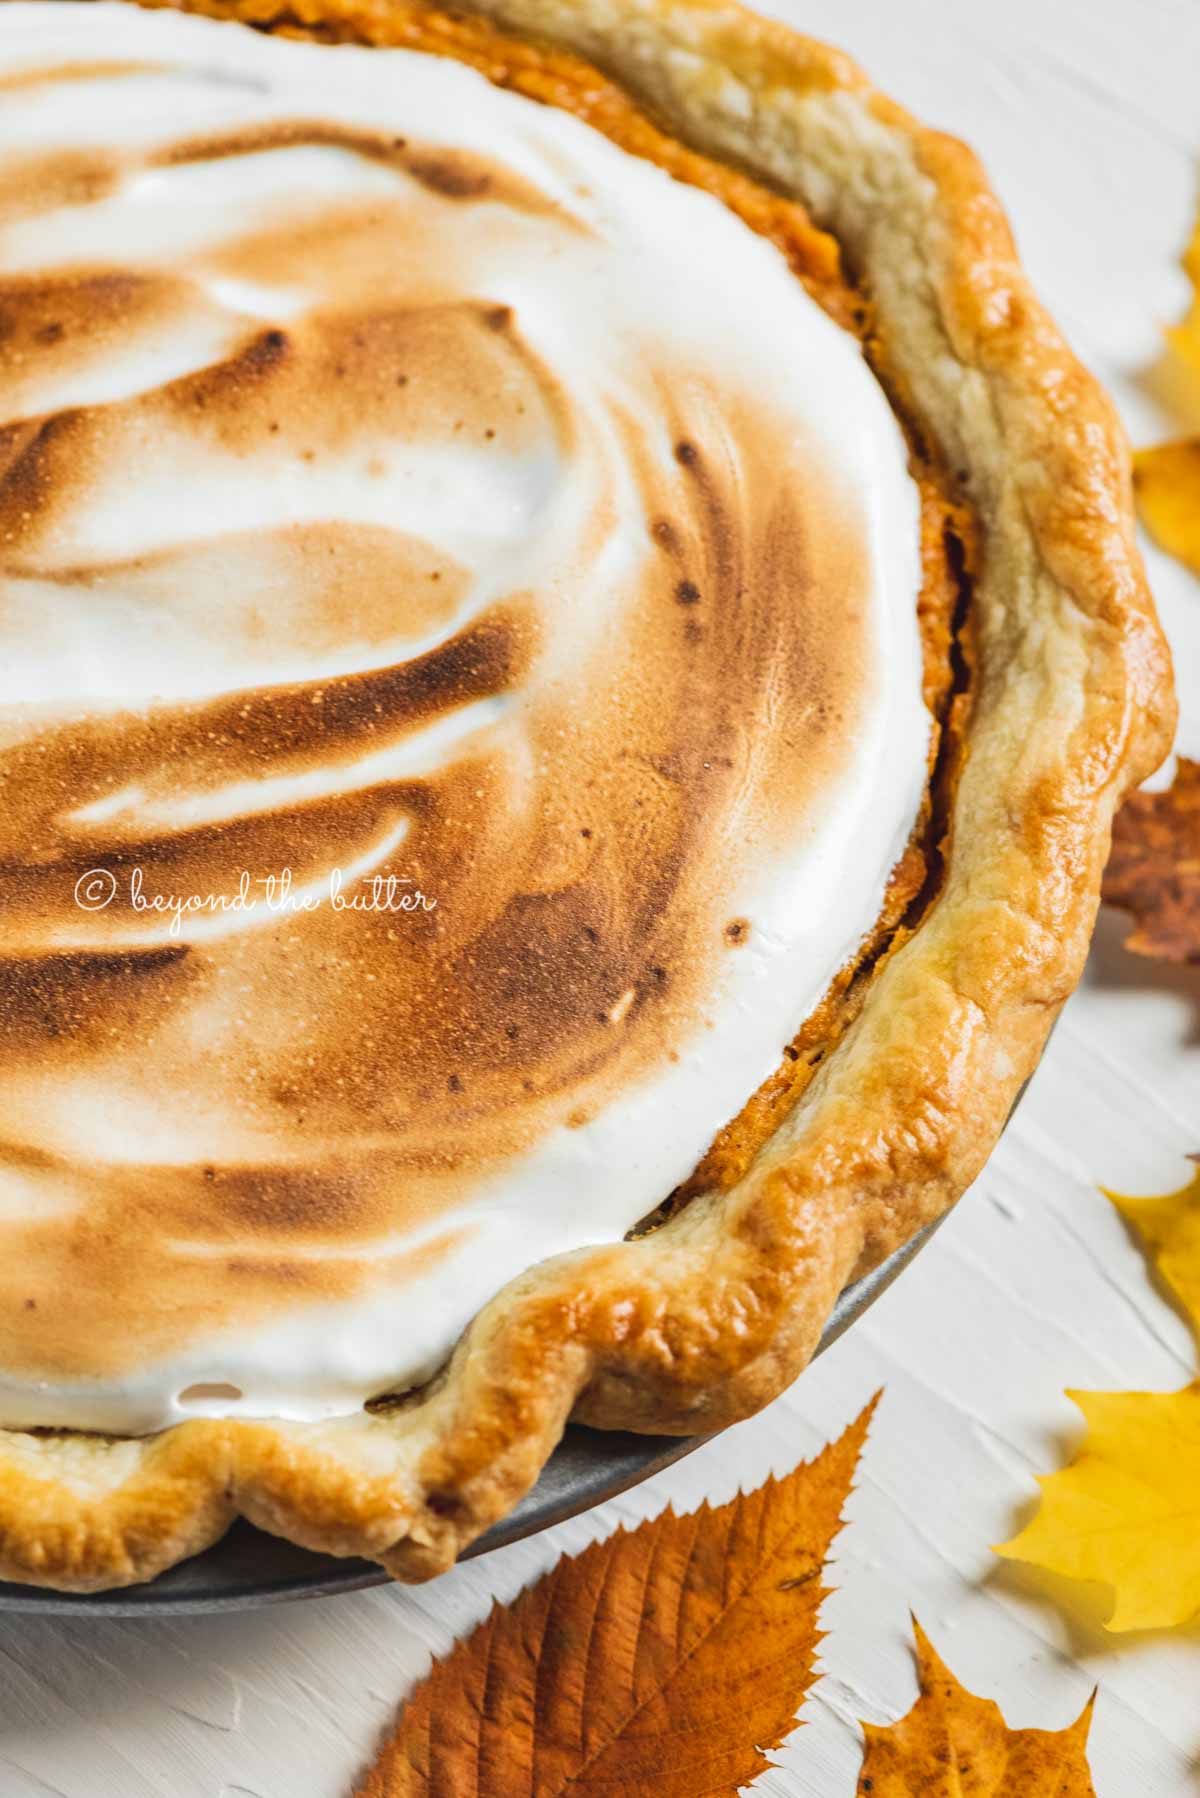 Angled close up of brown sugar sweet potato pie with toasted marshmallow meringue complimented by colorful fall leaves | All Images © Beyond the Butter®